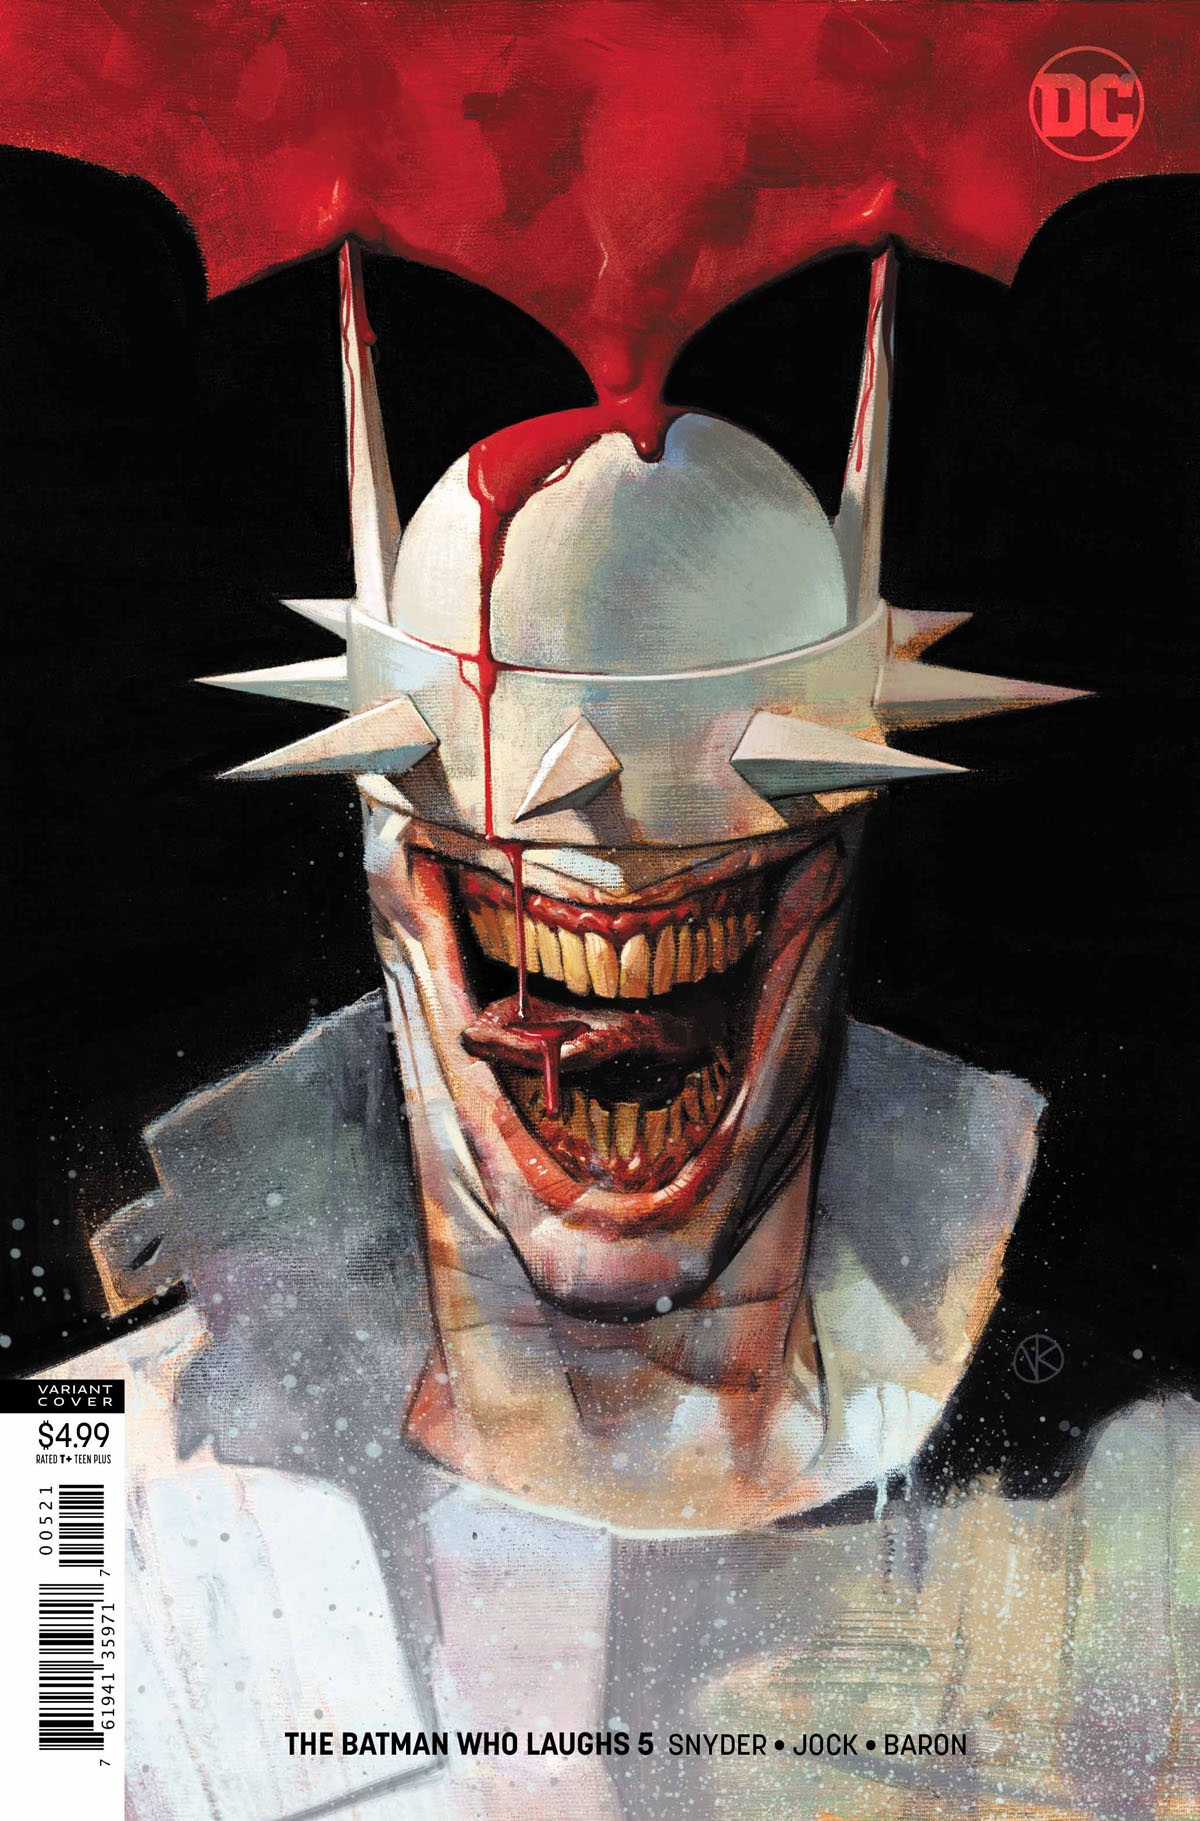 The Batman Who Laughs # 5 variant cover